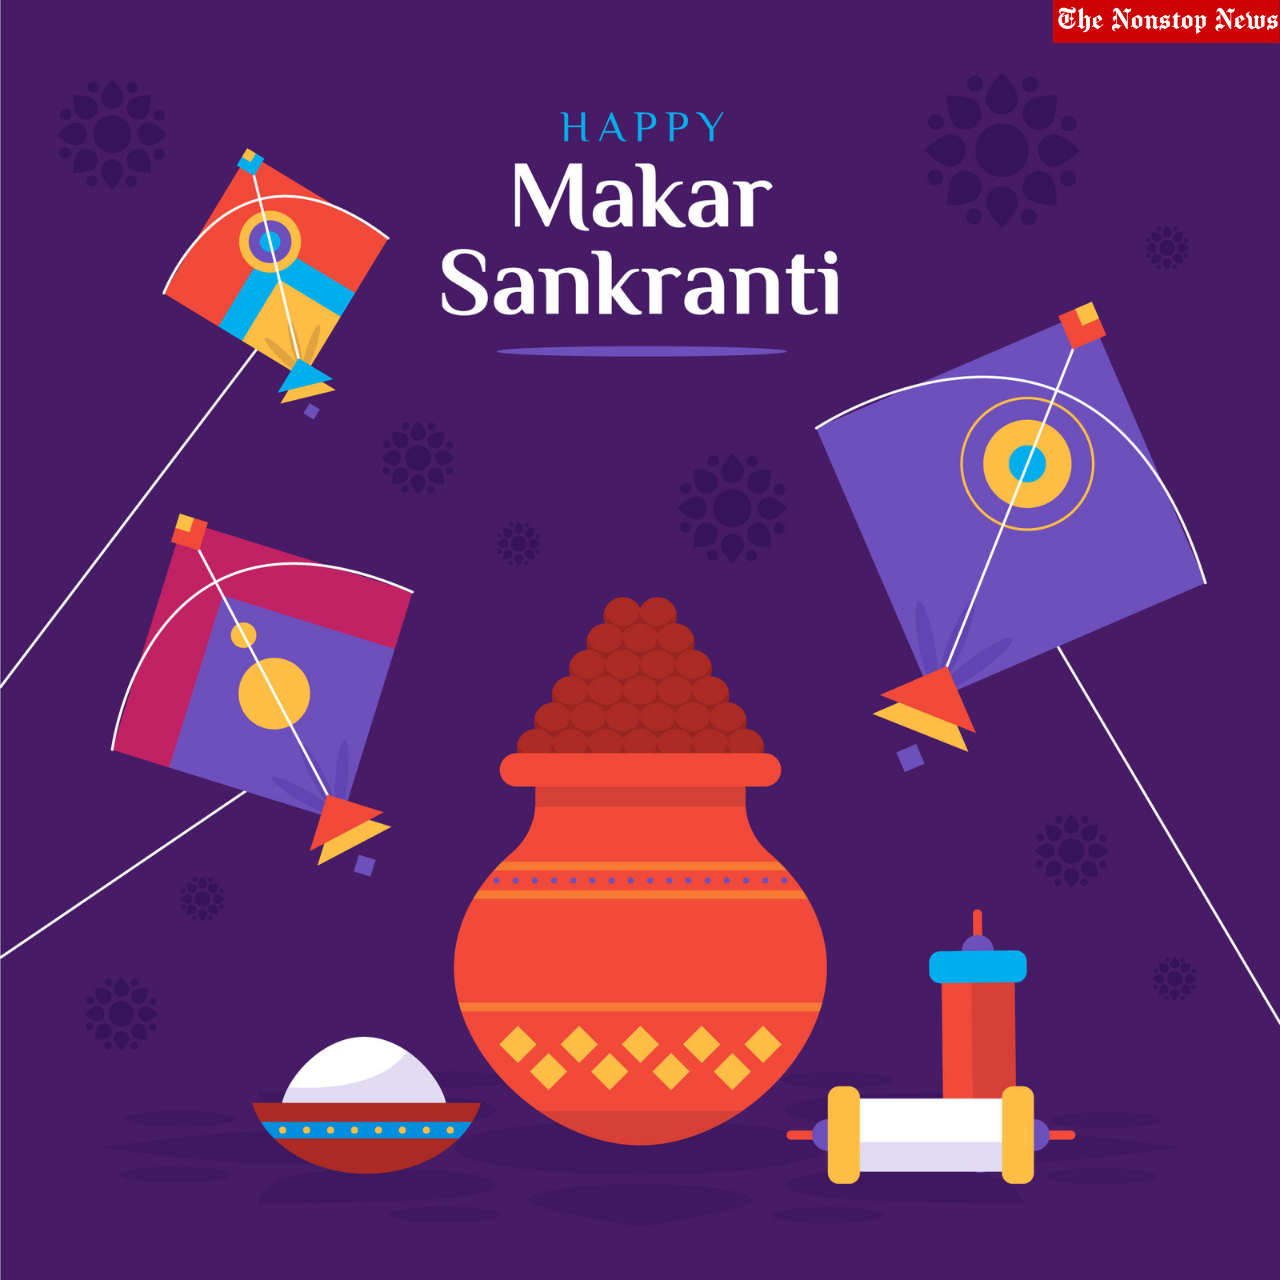 Makar Sankranti 2022 Instagram Captions, Facebook Status, WhatsApp Stickers, Twitter Messages, Pictures Drawings to Download